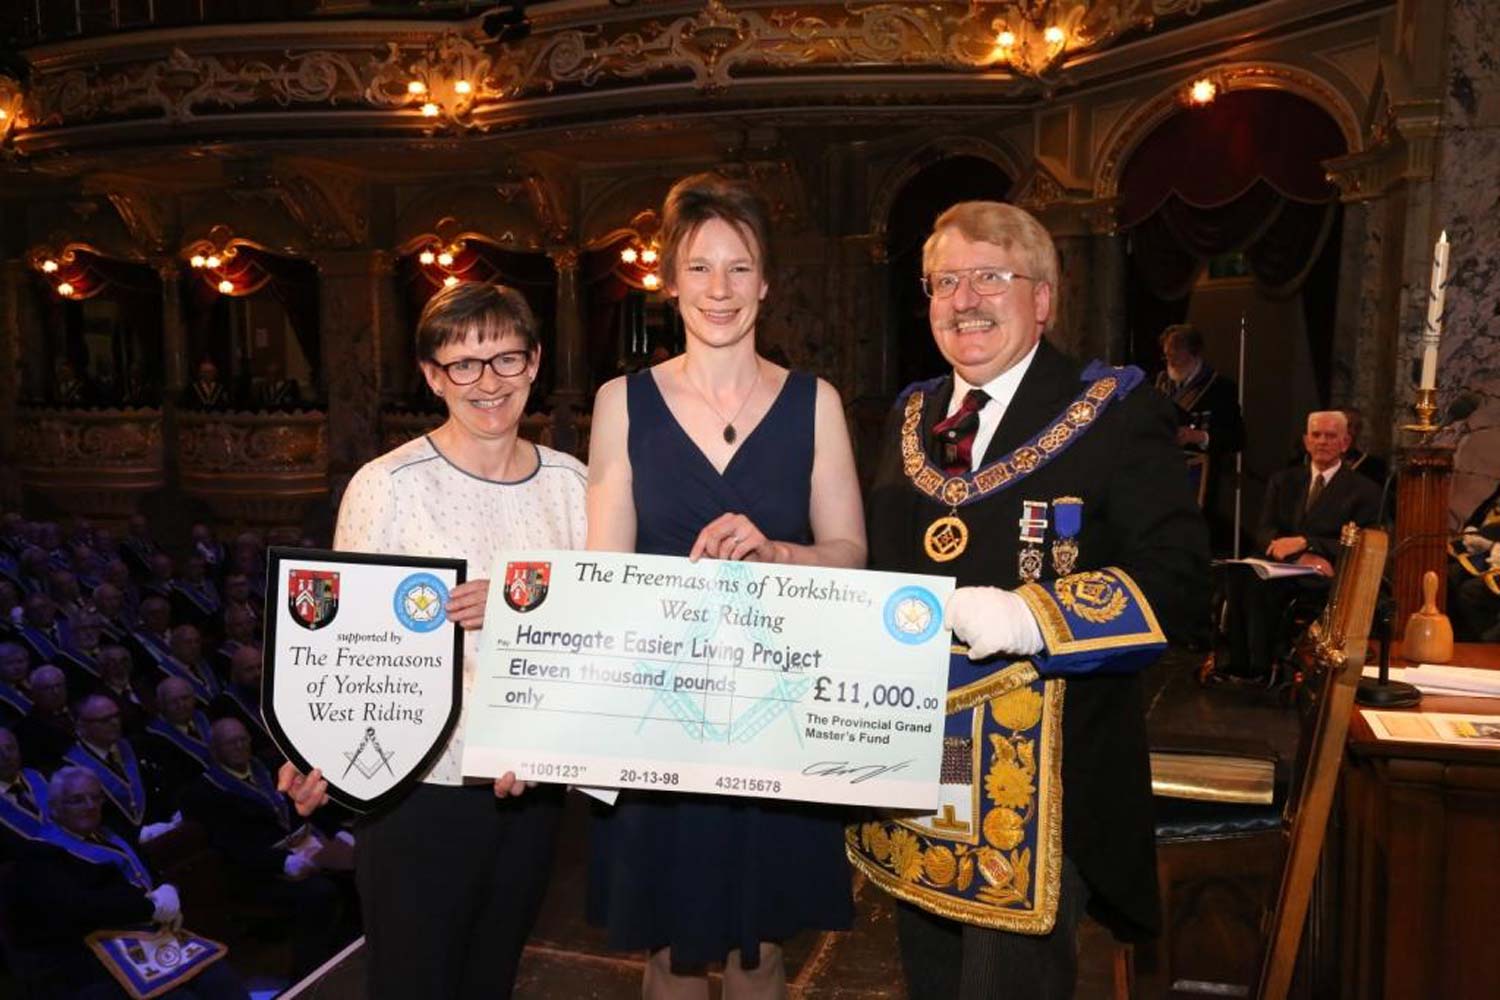 £11k HELPing hand! David S Pratt, the Provincial Grand Master of the Province of Yorkshire West Riding with Frances Elliot (right) Head of Practical Support Services, overseeing all the HELP projects; and Karen Weaver, Chief Executive Officer of  Harrogate and Ripon Centres for Voluntary Service